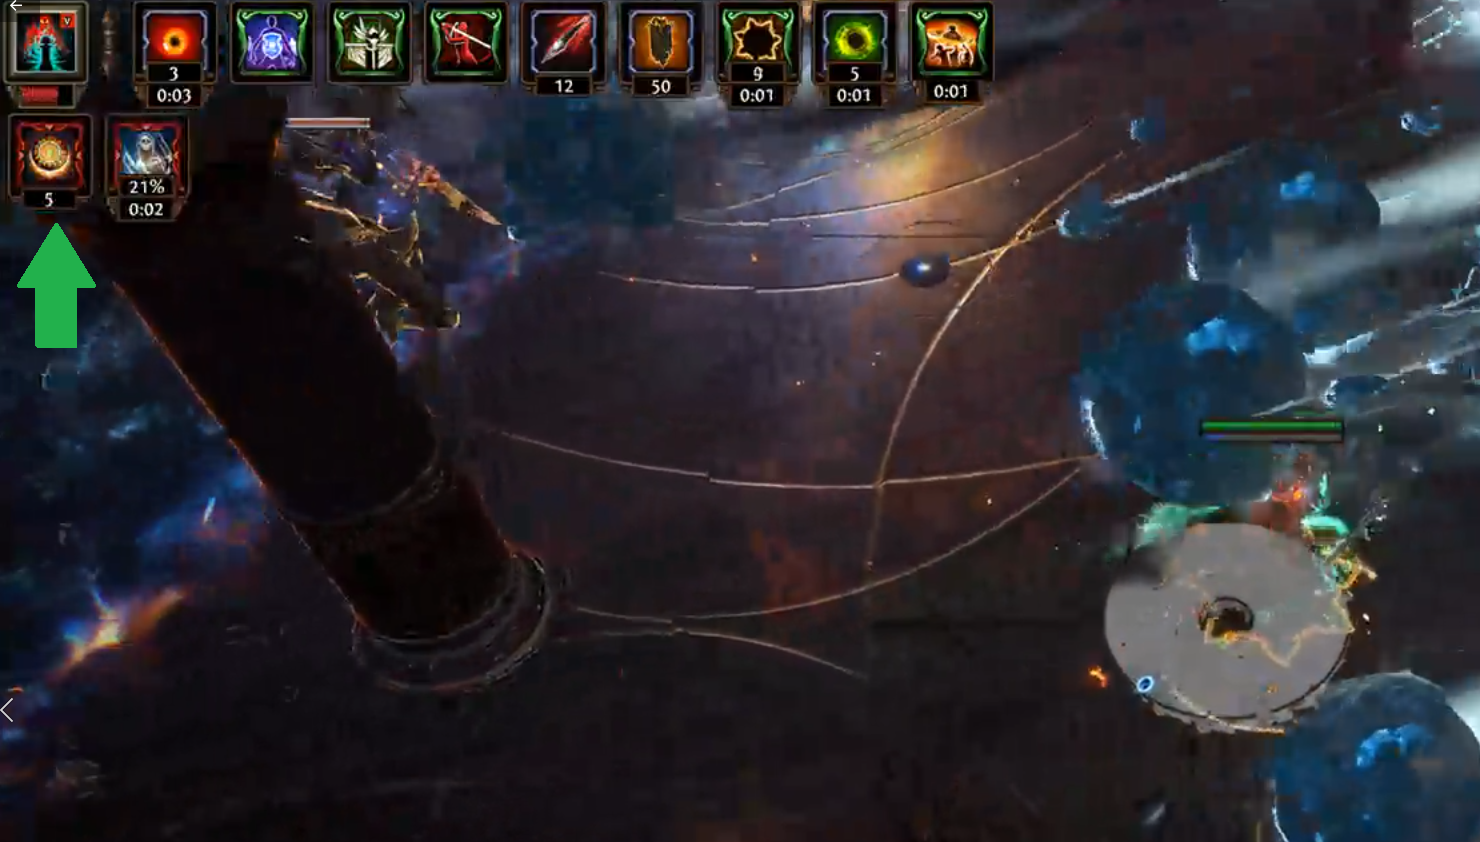 The Astral Avalanche attack from the Black Star in Path Of Exile